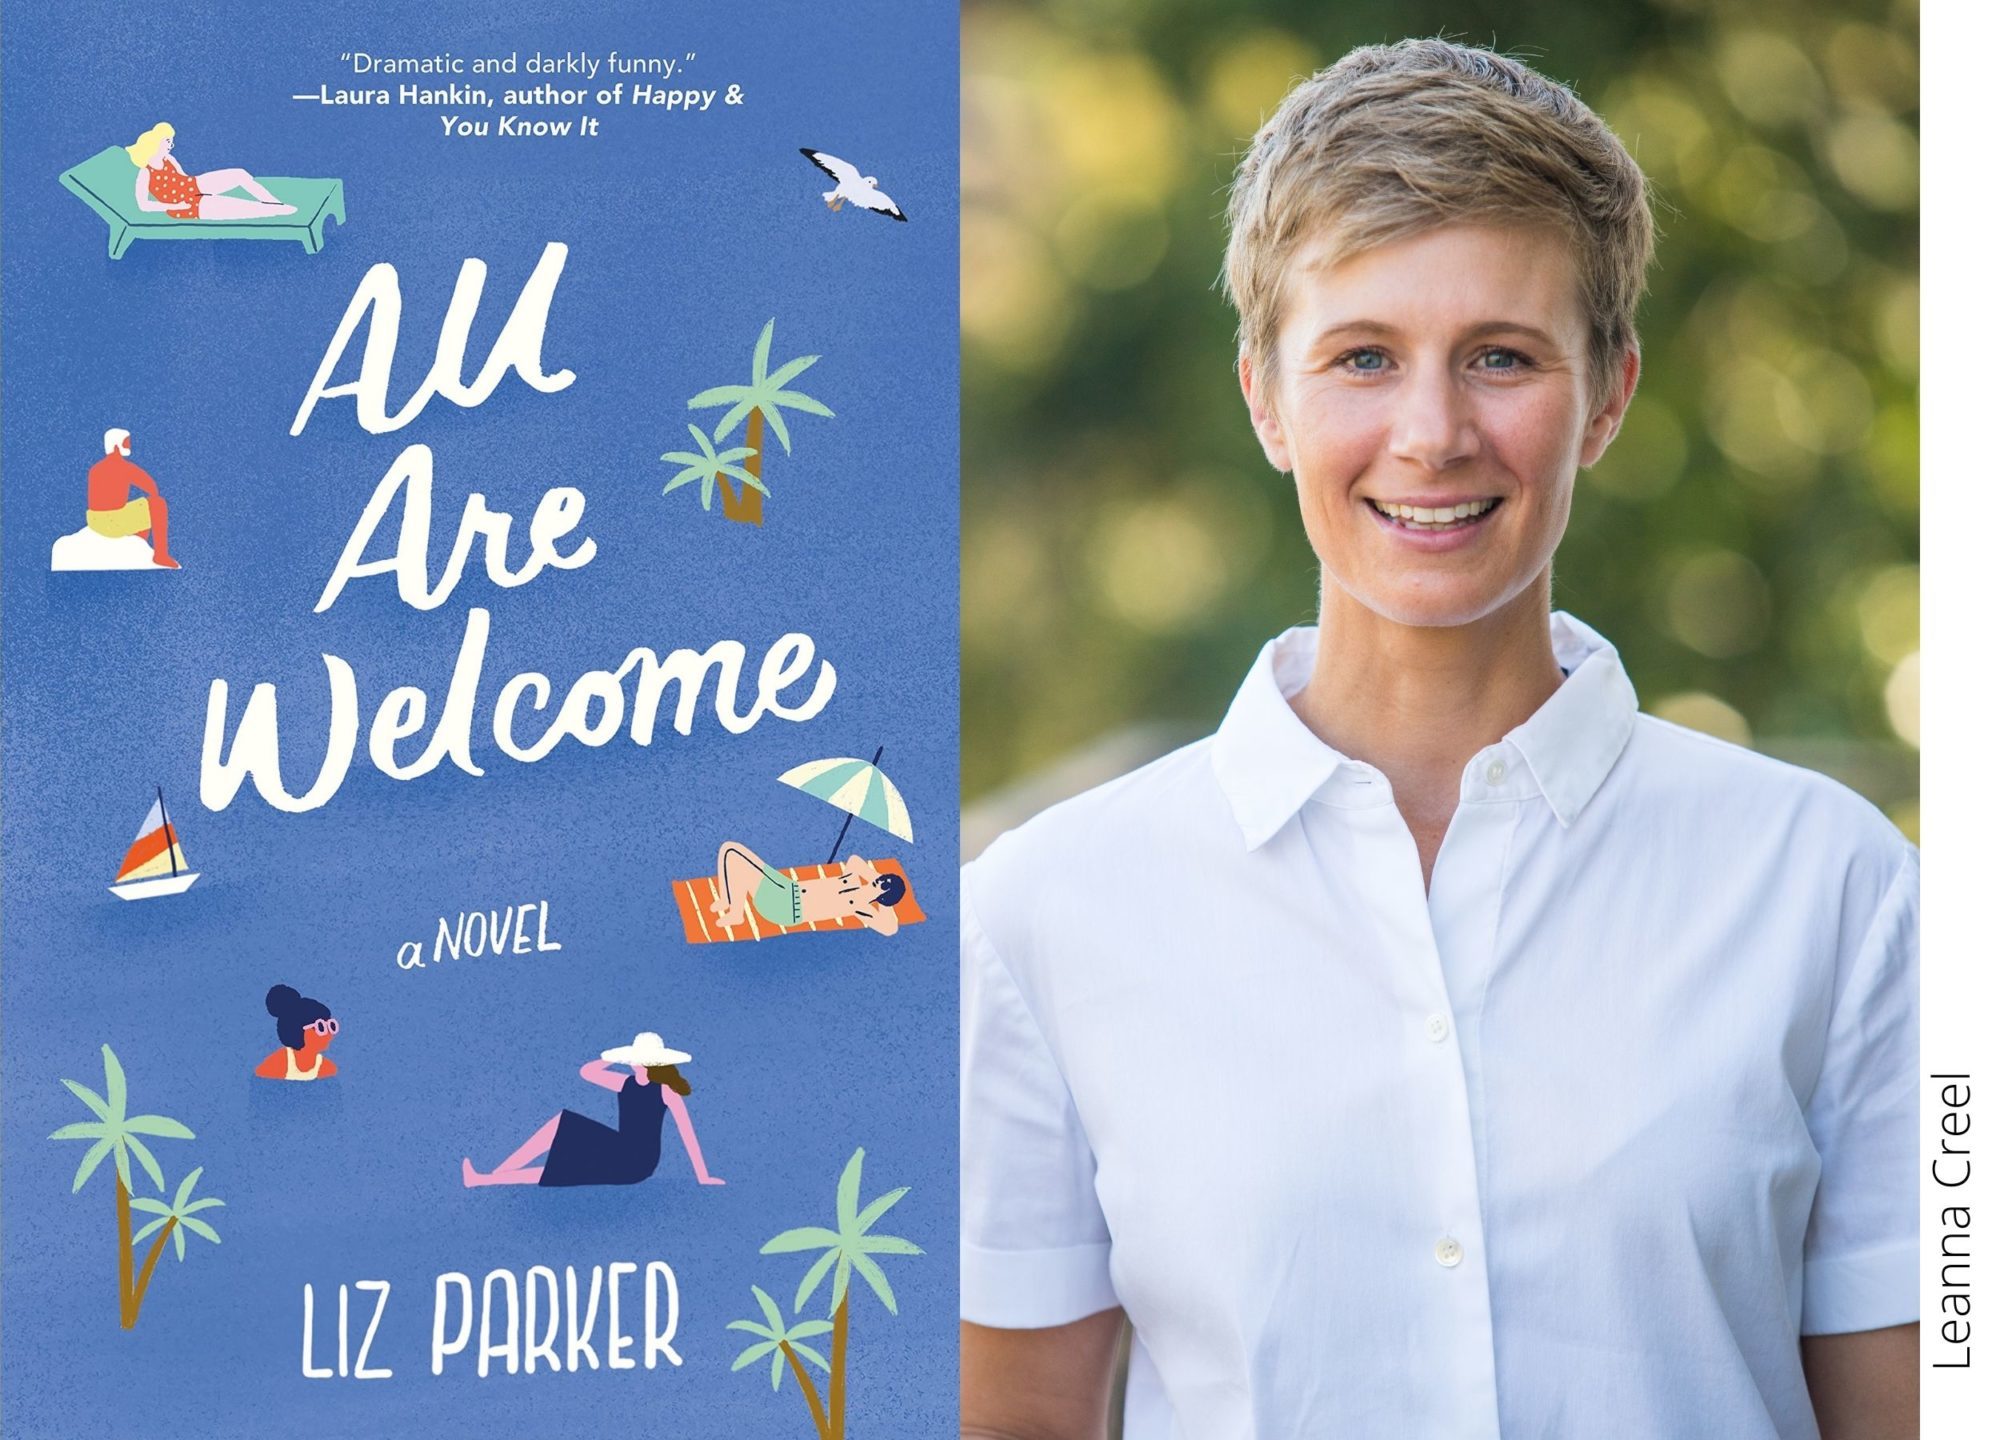 All Are Welcome by Liz Parker